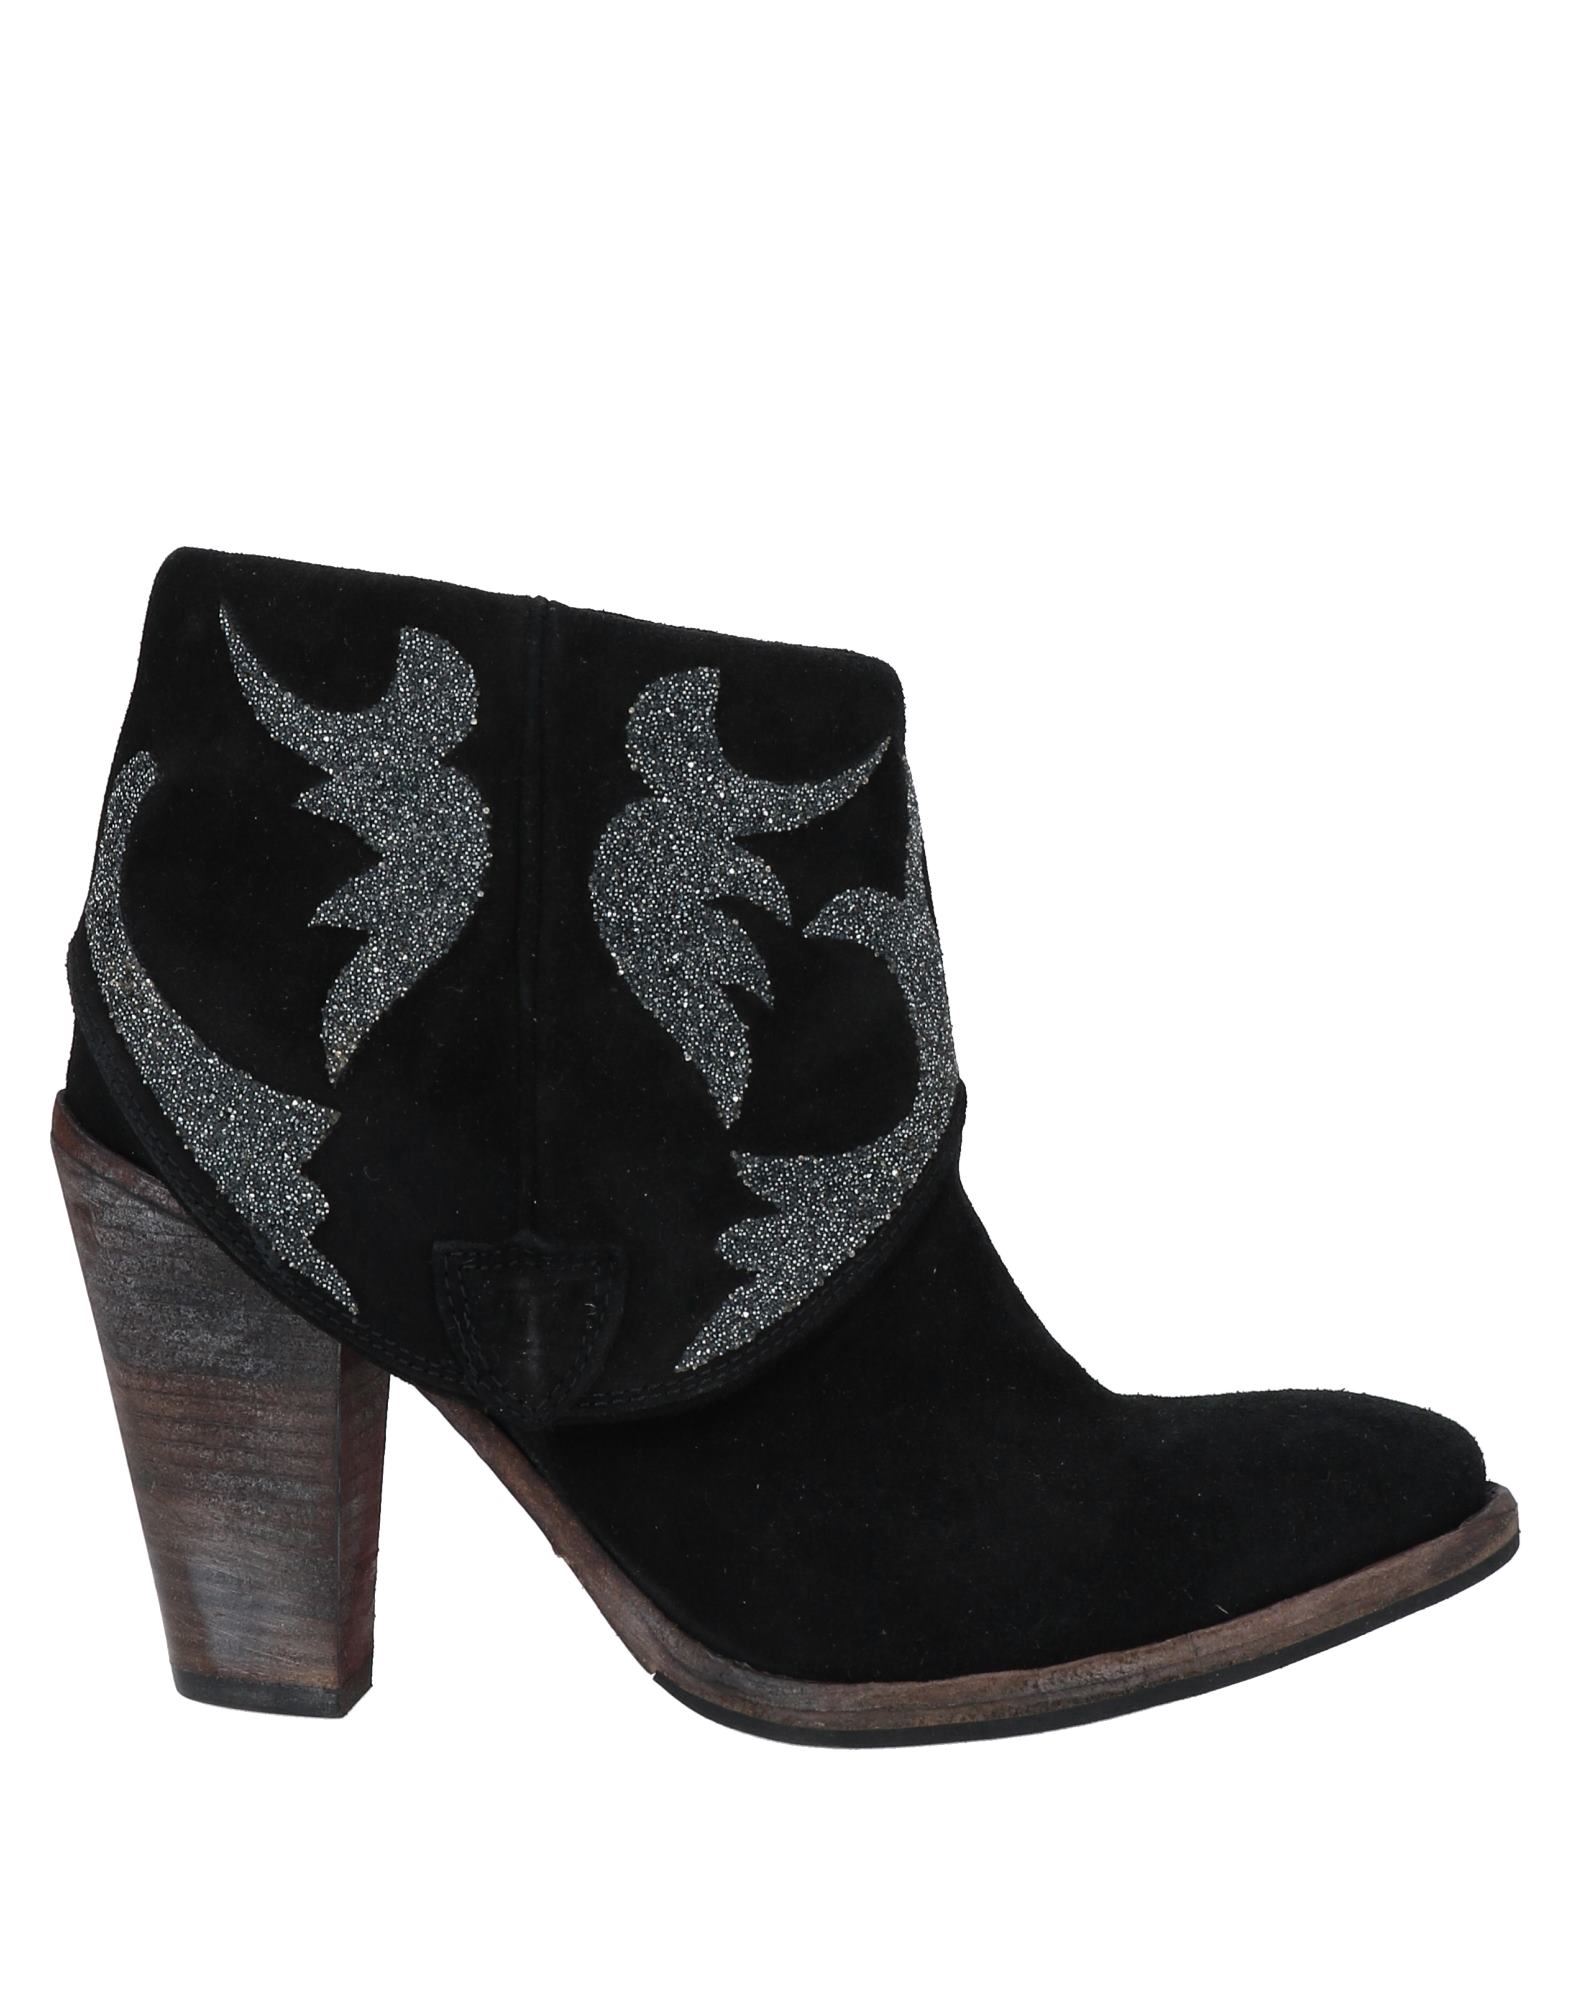 Htc Ankle Boots In Black